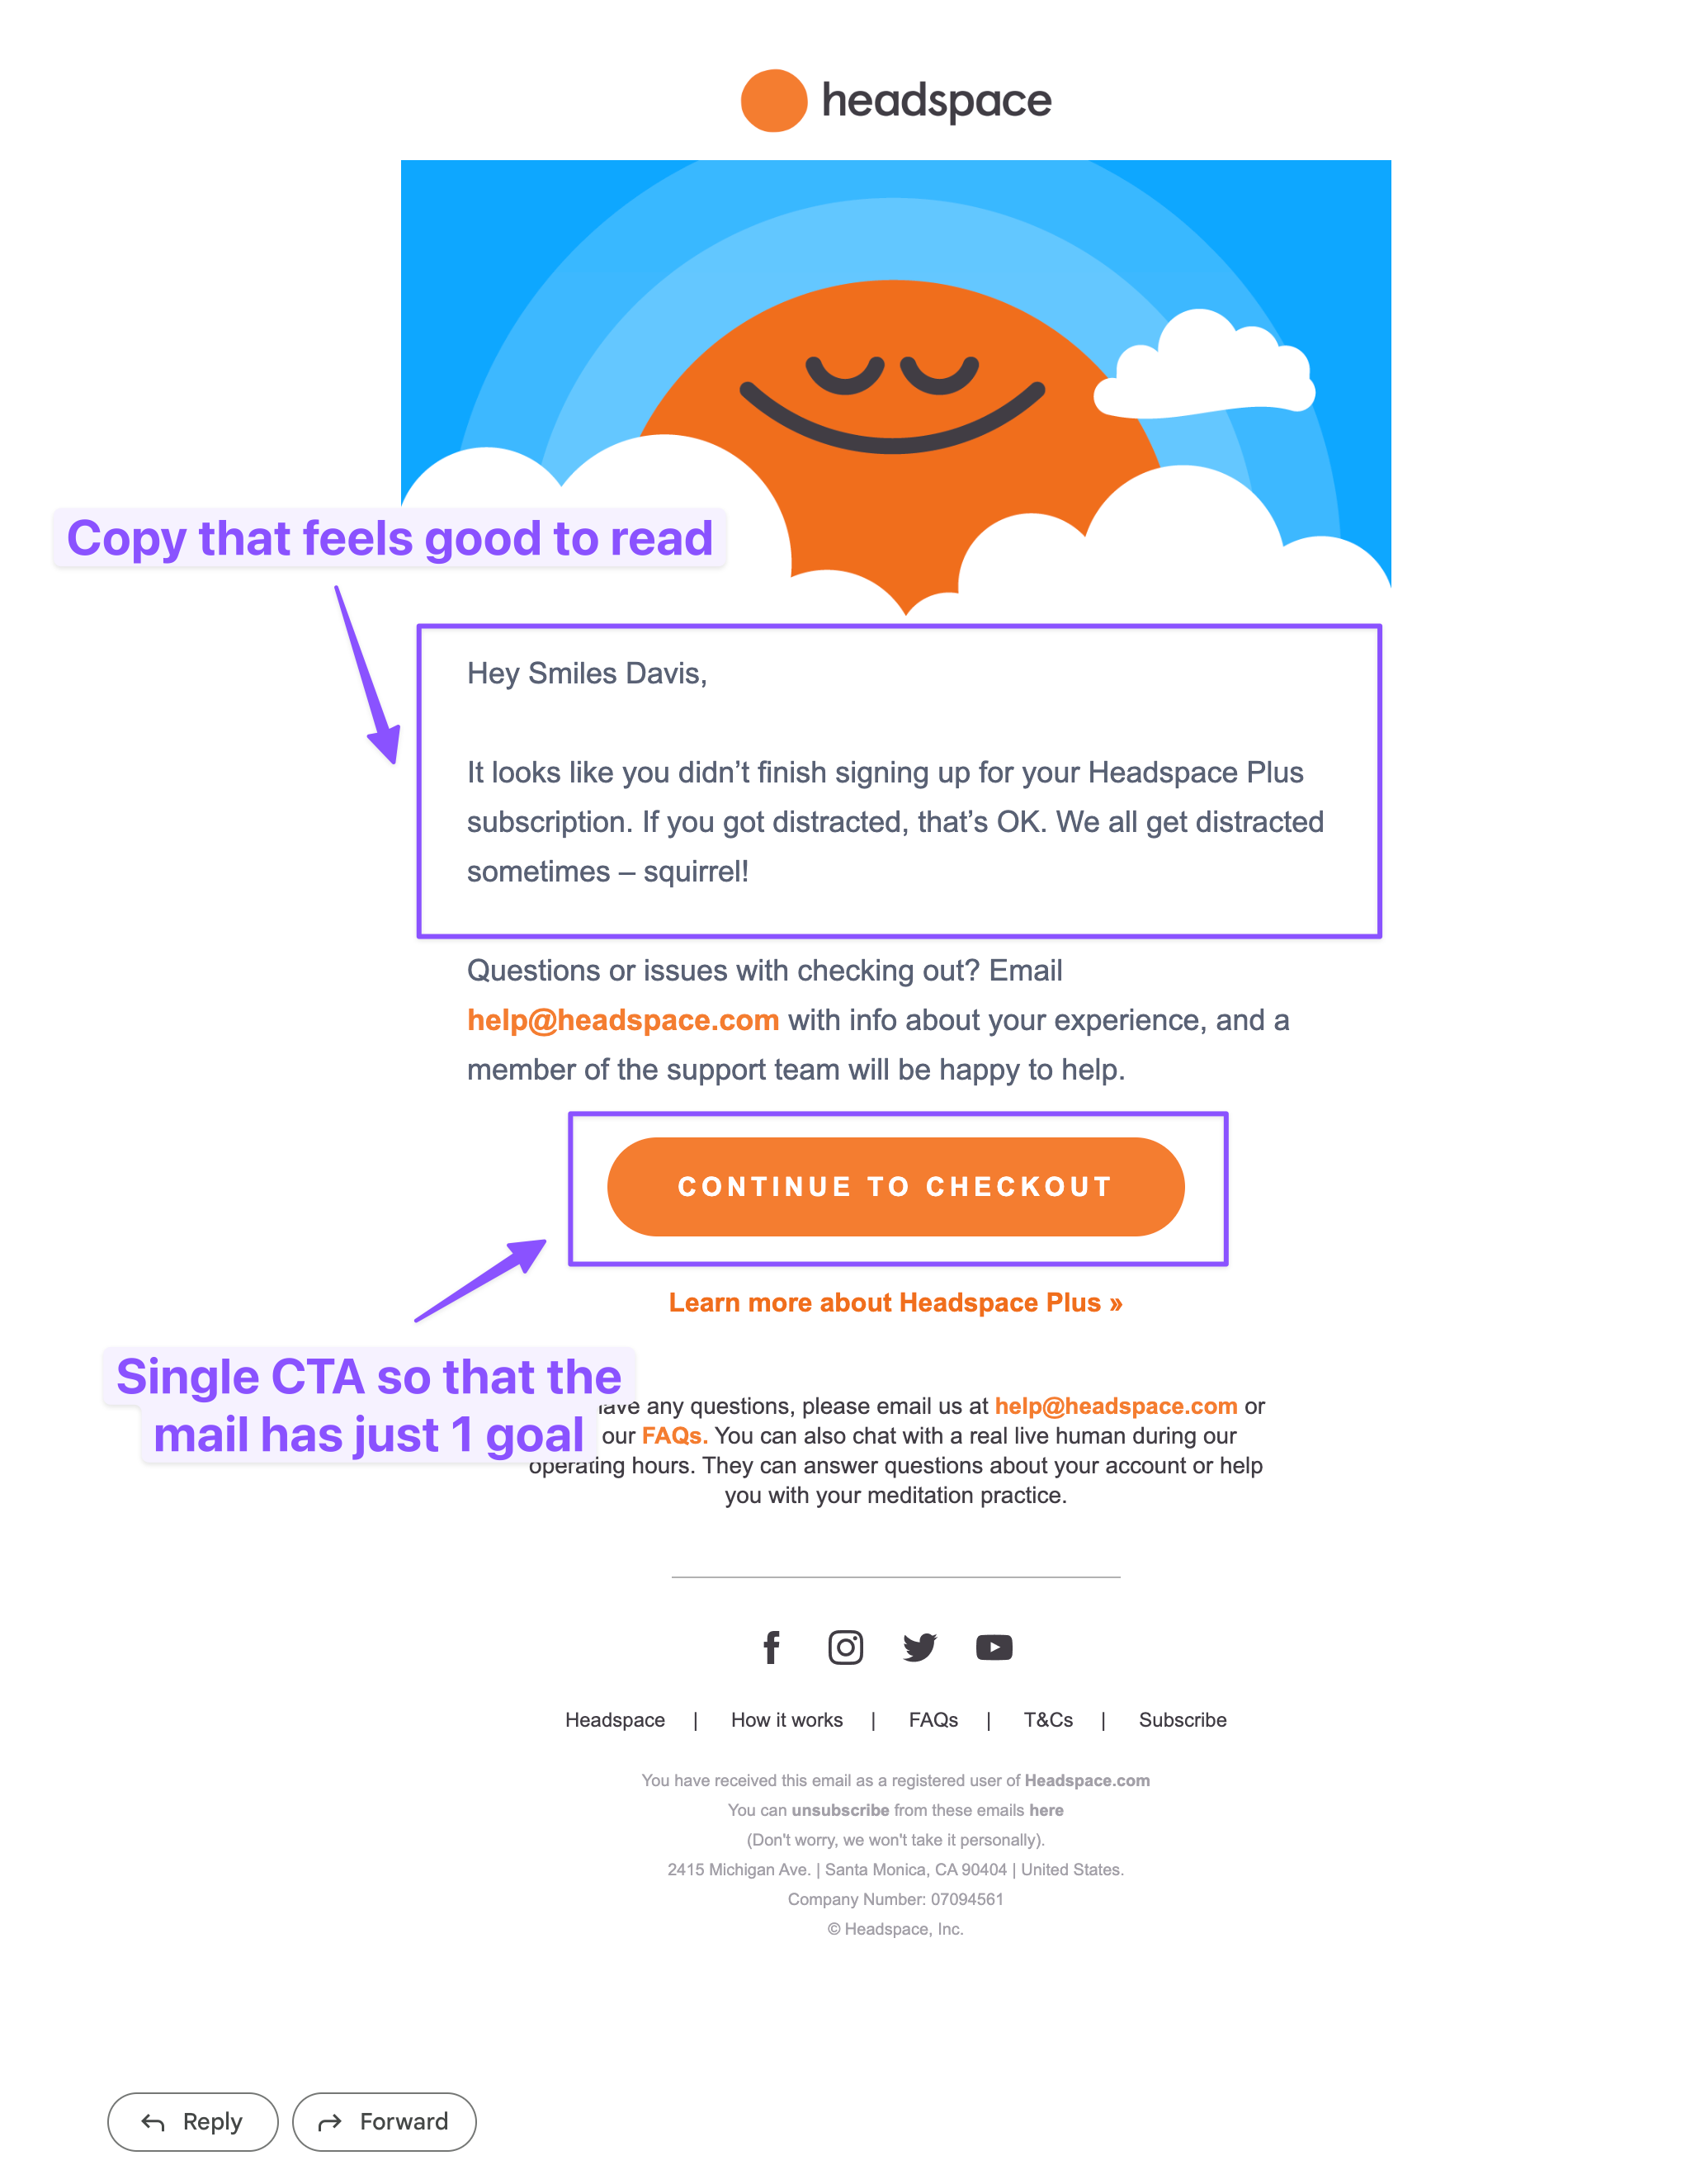 Headspace's cart abandonment email design